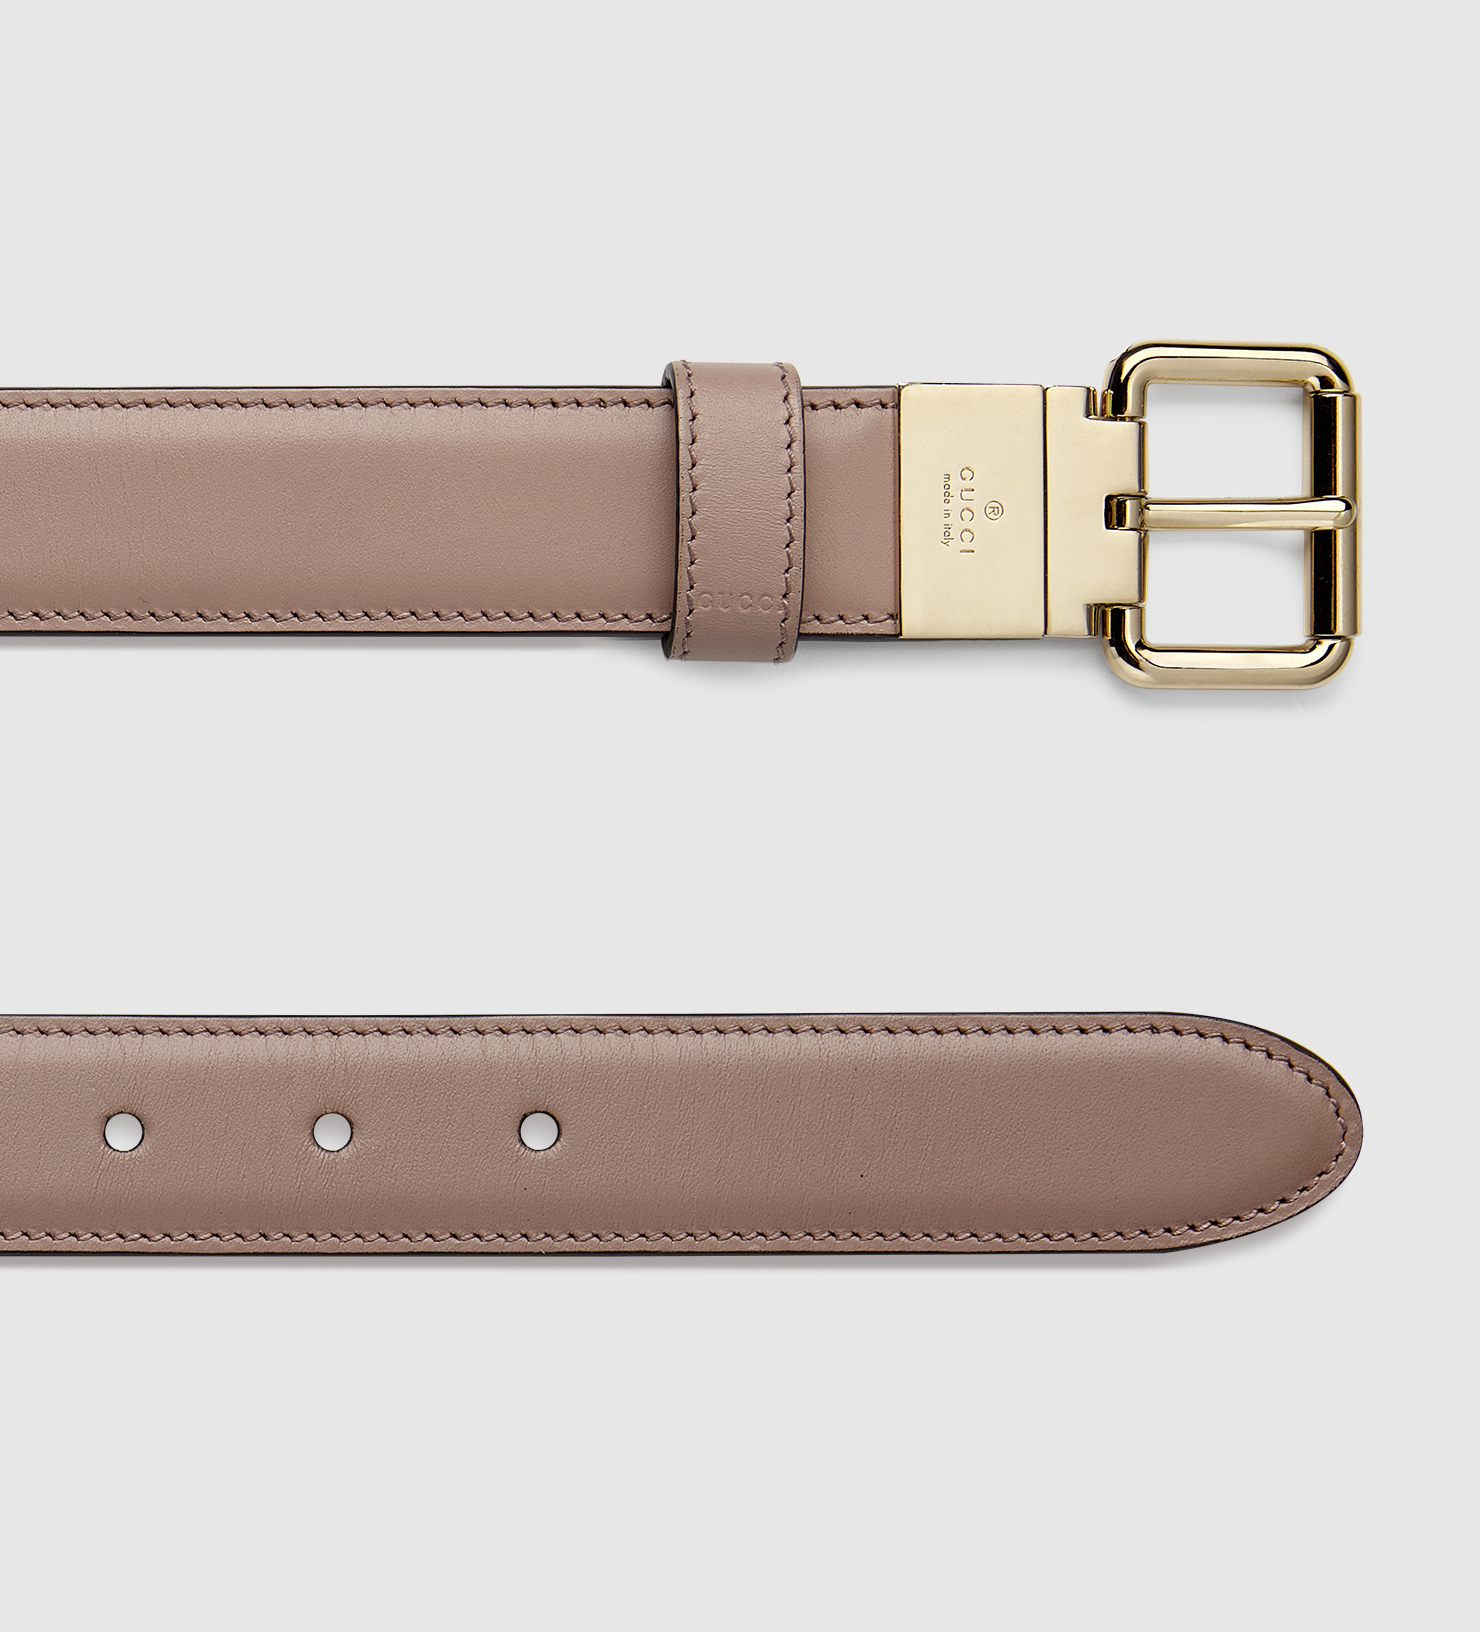 Gucci Reversible Leather Belt in Natural - Lyst